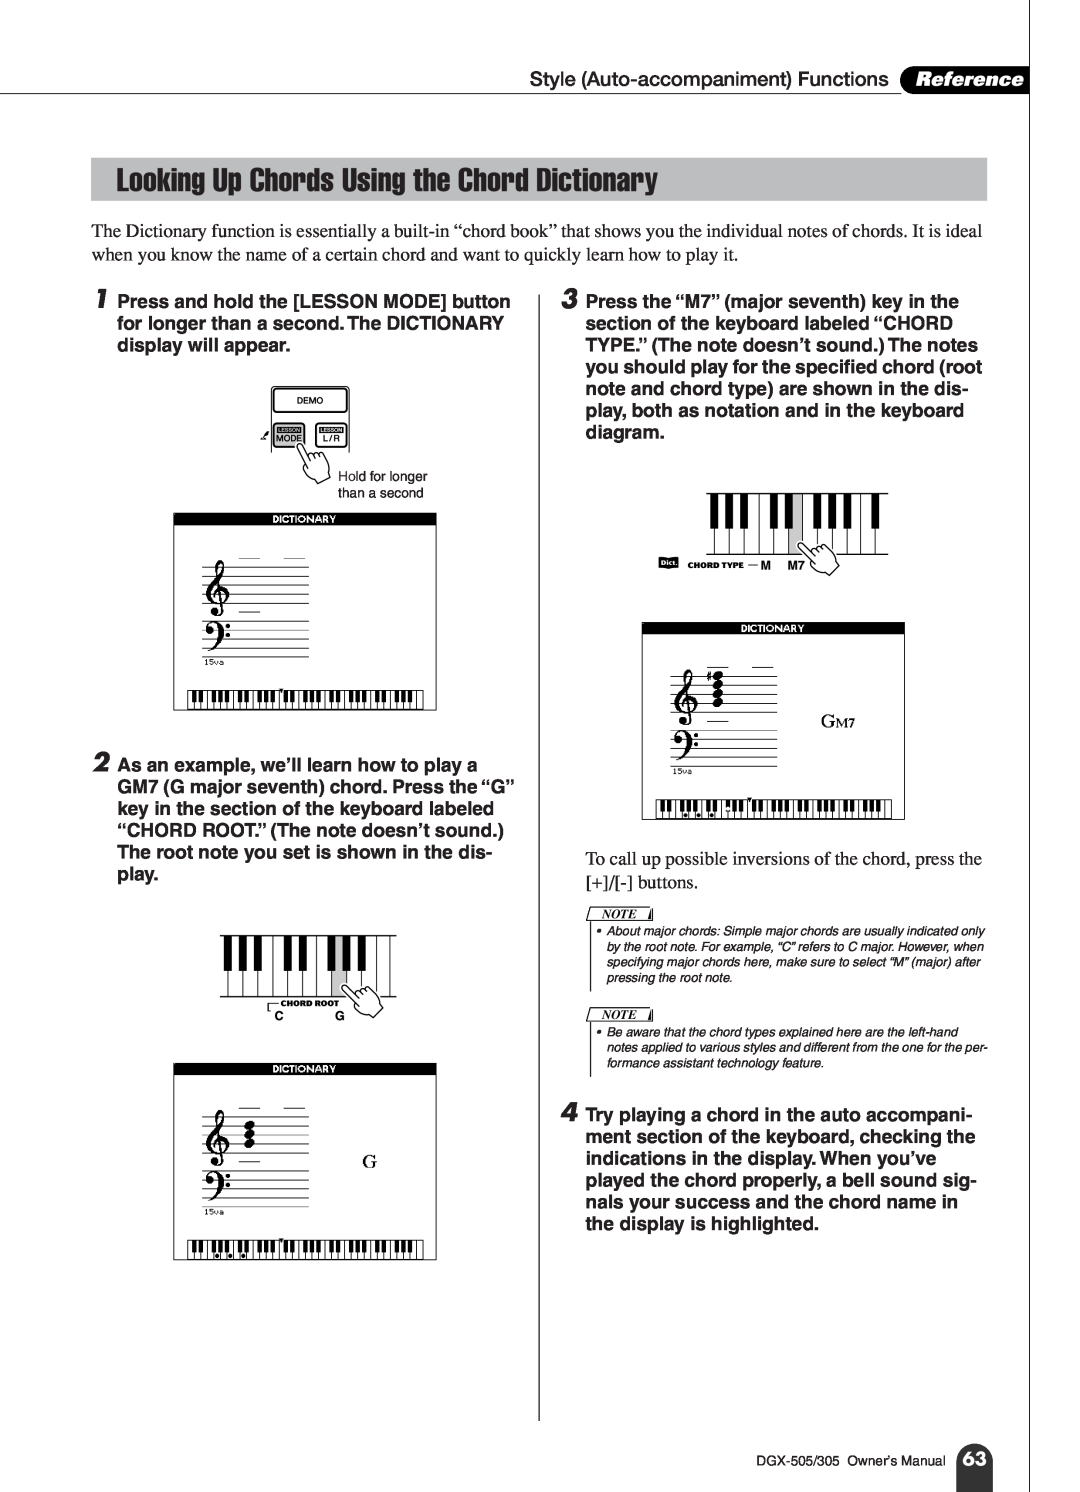 Yamaha DGX-305, DGX-505 manual Looking Up Chords Using the Chord Dictionary, Style Auto-accompaniment Functions Reference 